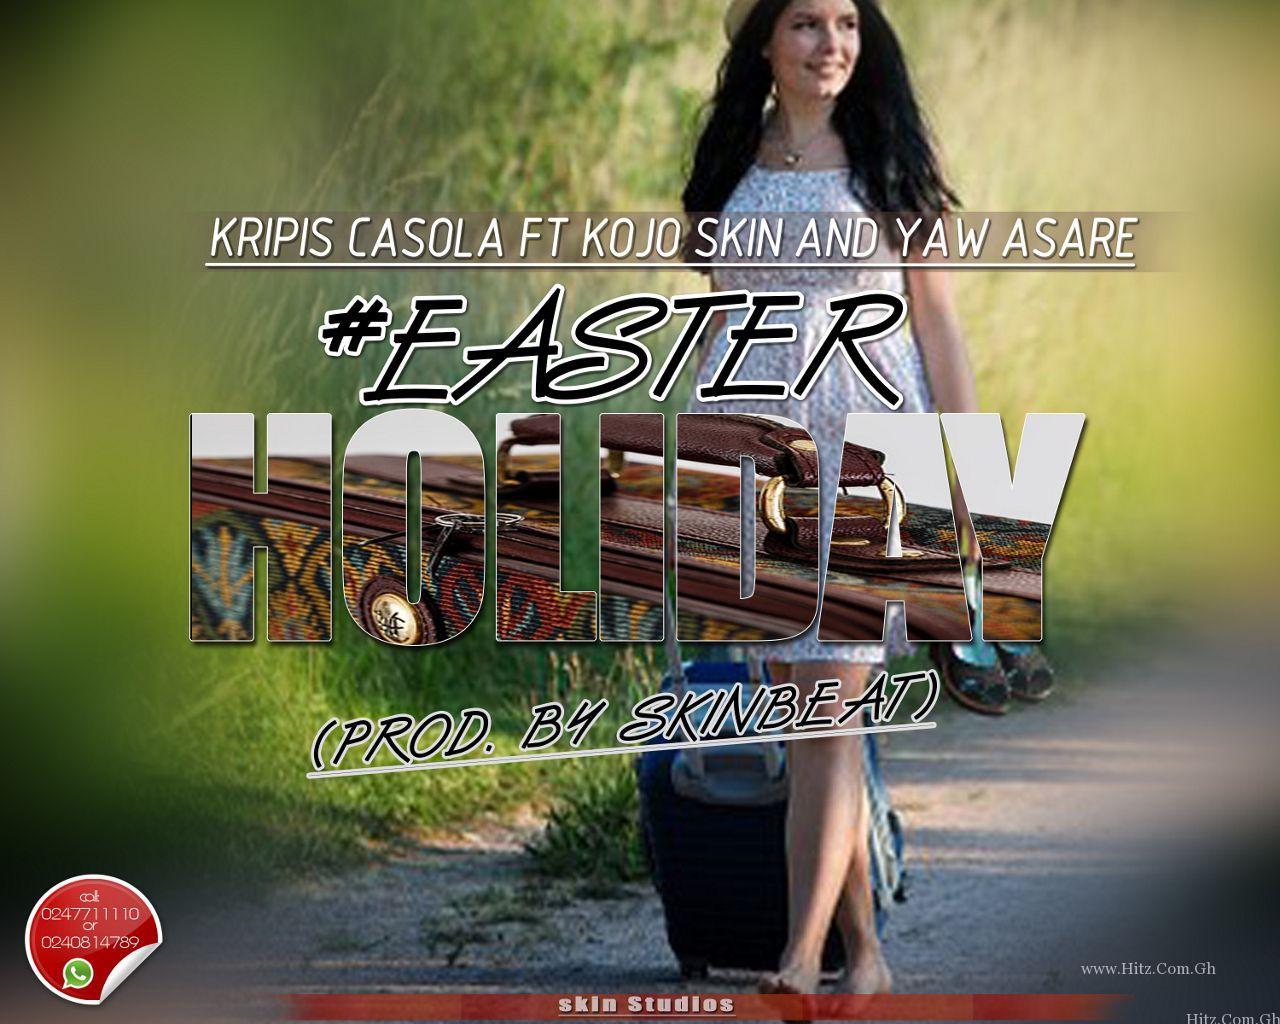 Kripis Casola Easter Holiday Feat